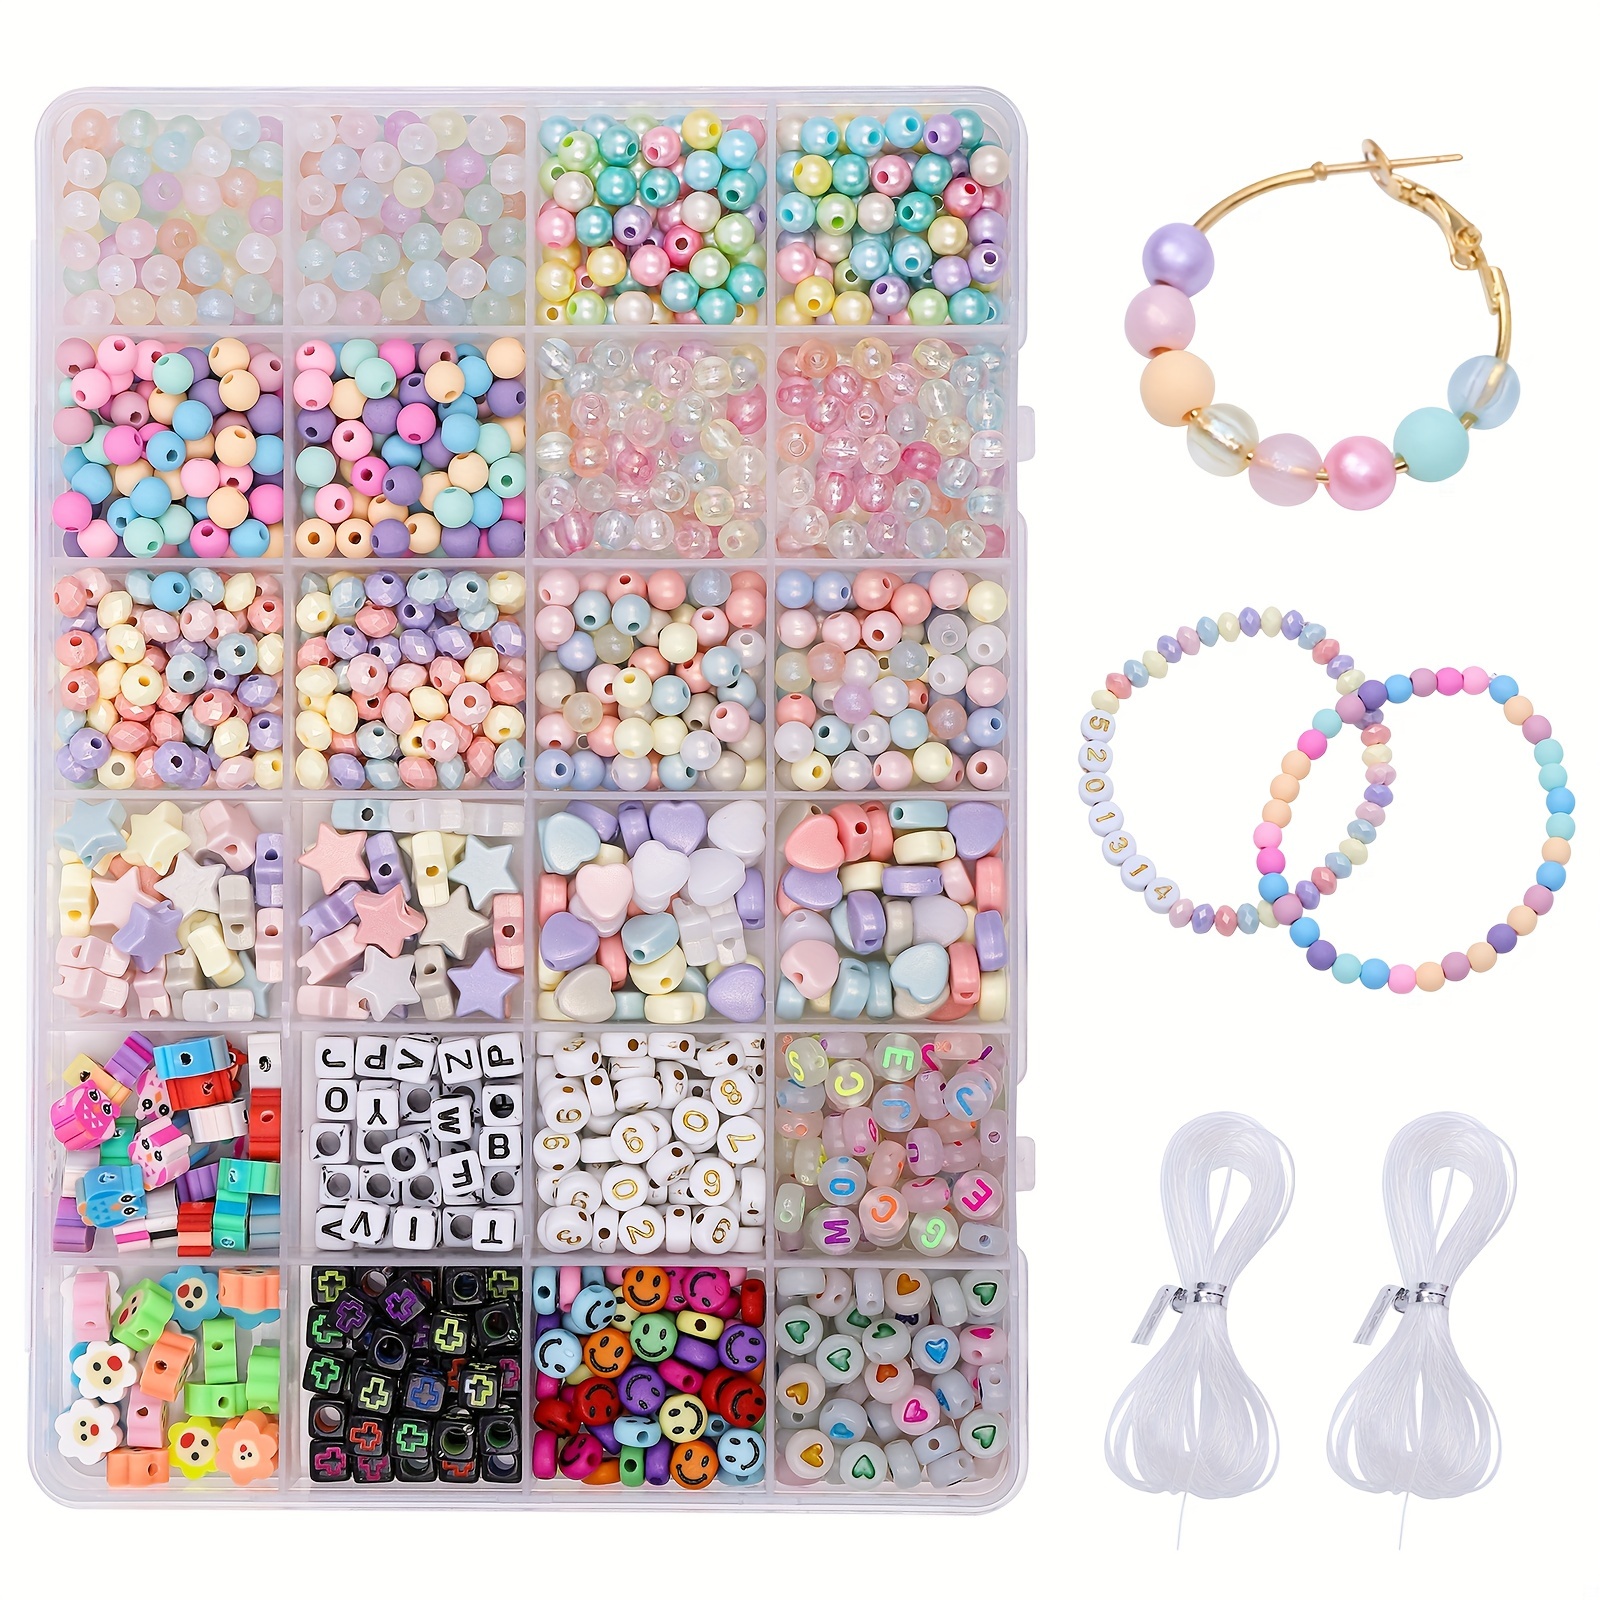 Jewelry Making Bead Kits for Girls Over 10000 PCS Bracelet Making Kit Beads  for Kids Includes Clay Beads, Plastic Beads, Scissors, Strings and  Accessories with 3-Layer Storage Box Gift Crafts : 